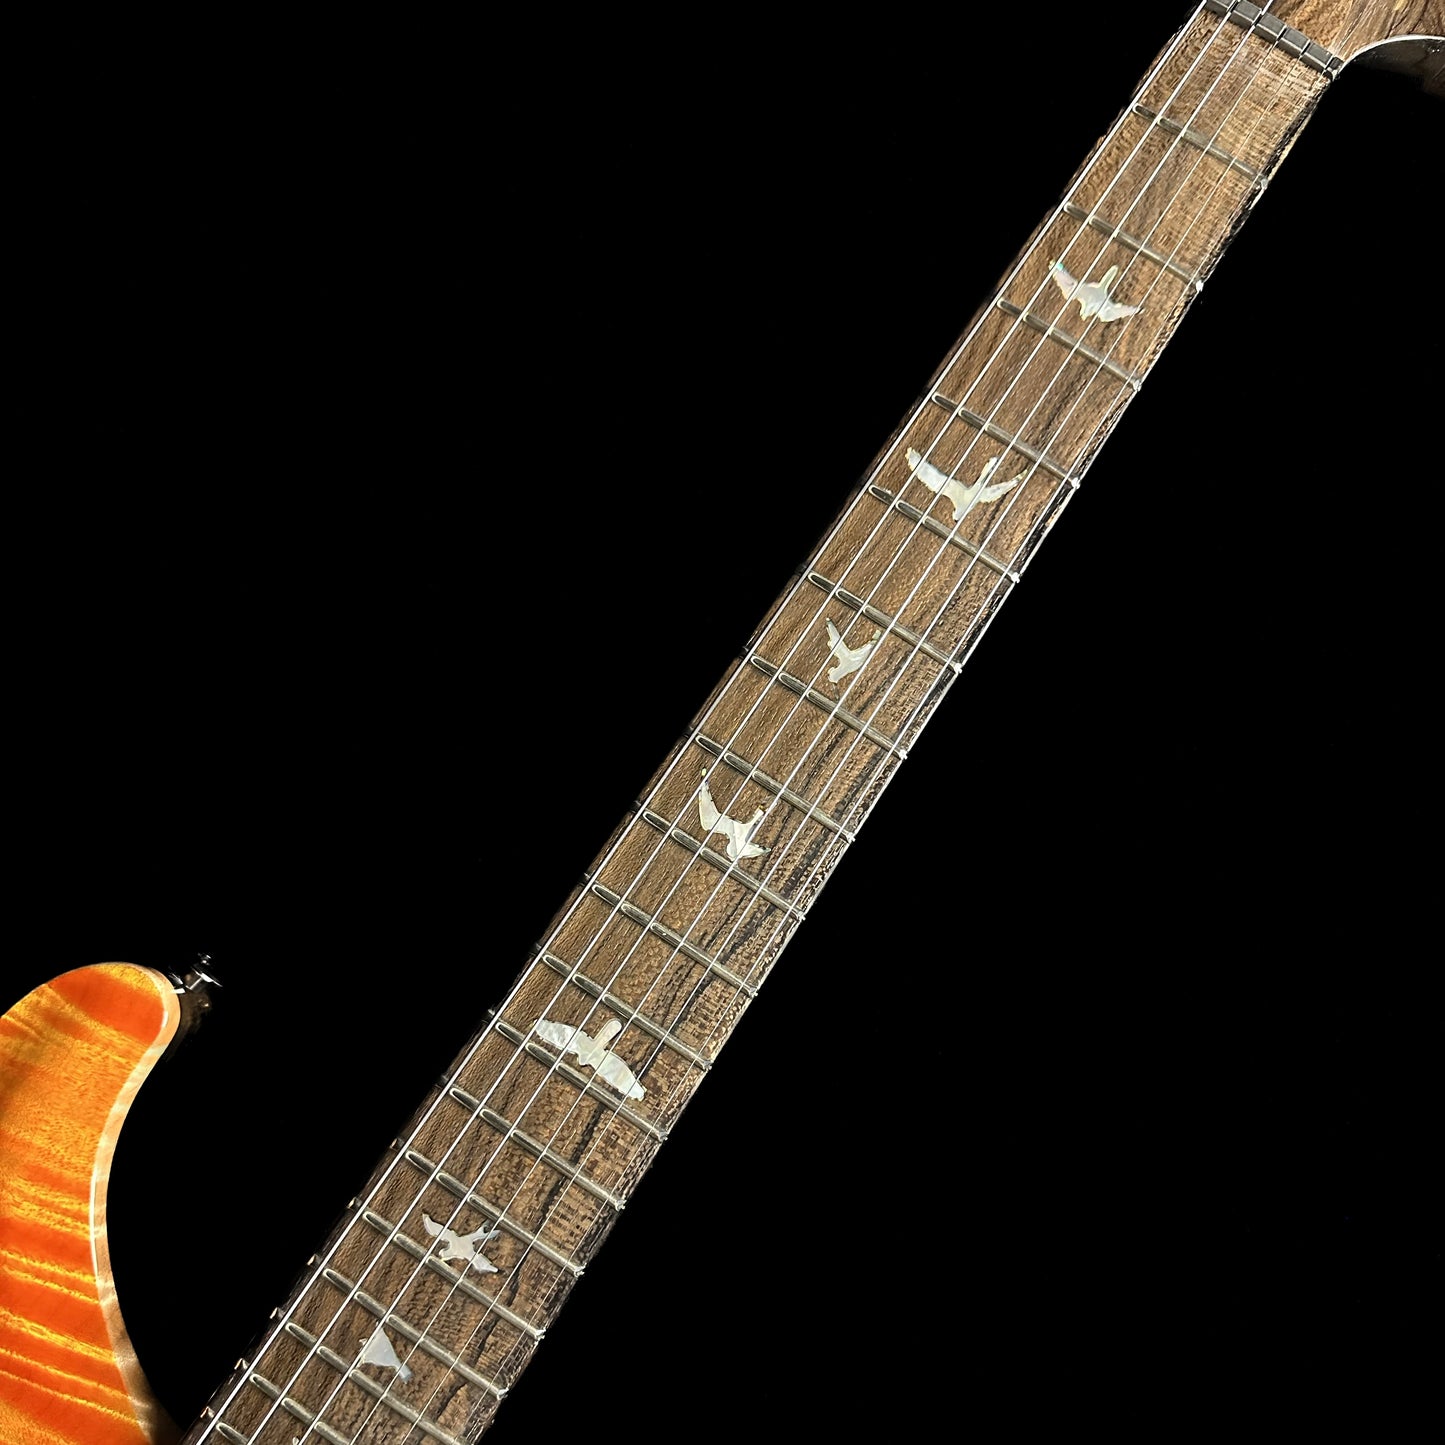 Fretboard of PRS Private Stock Special Semi-hollow Limited Edition Citrus Glow.